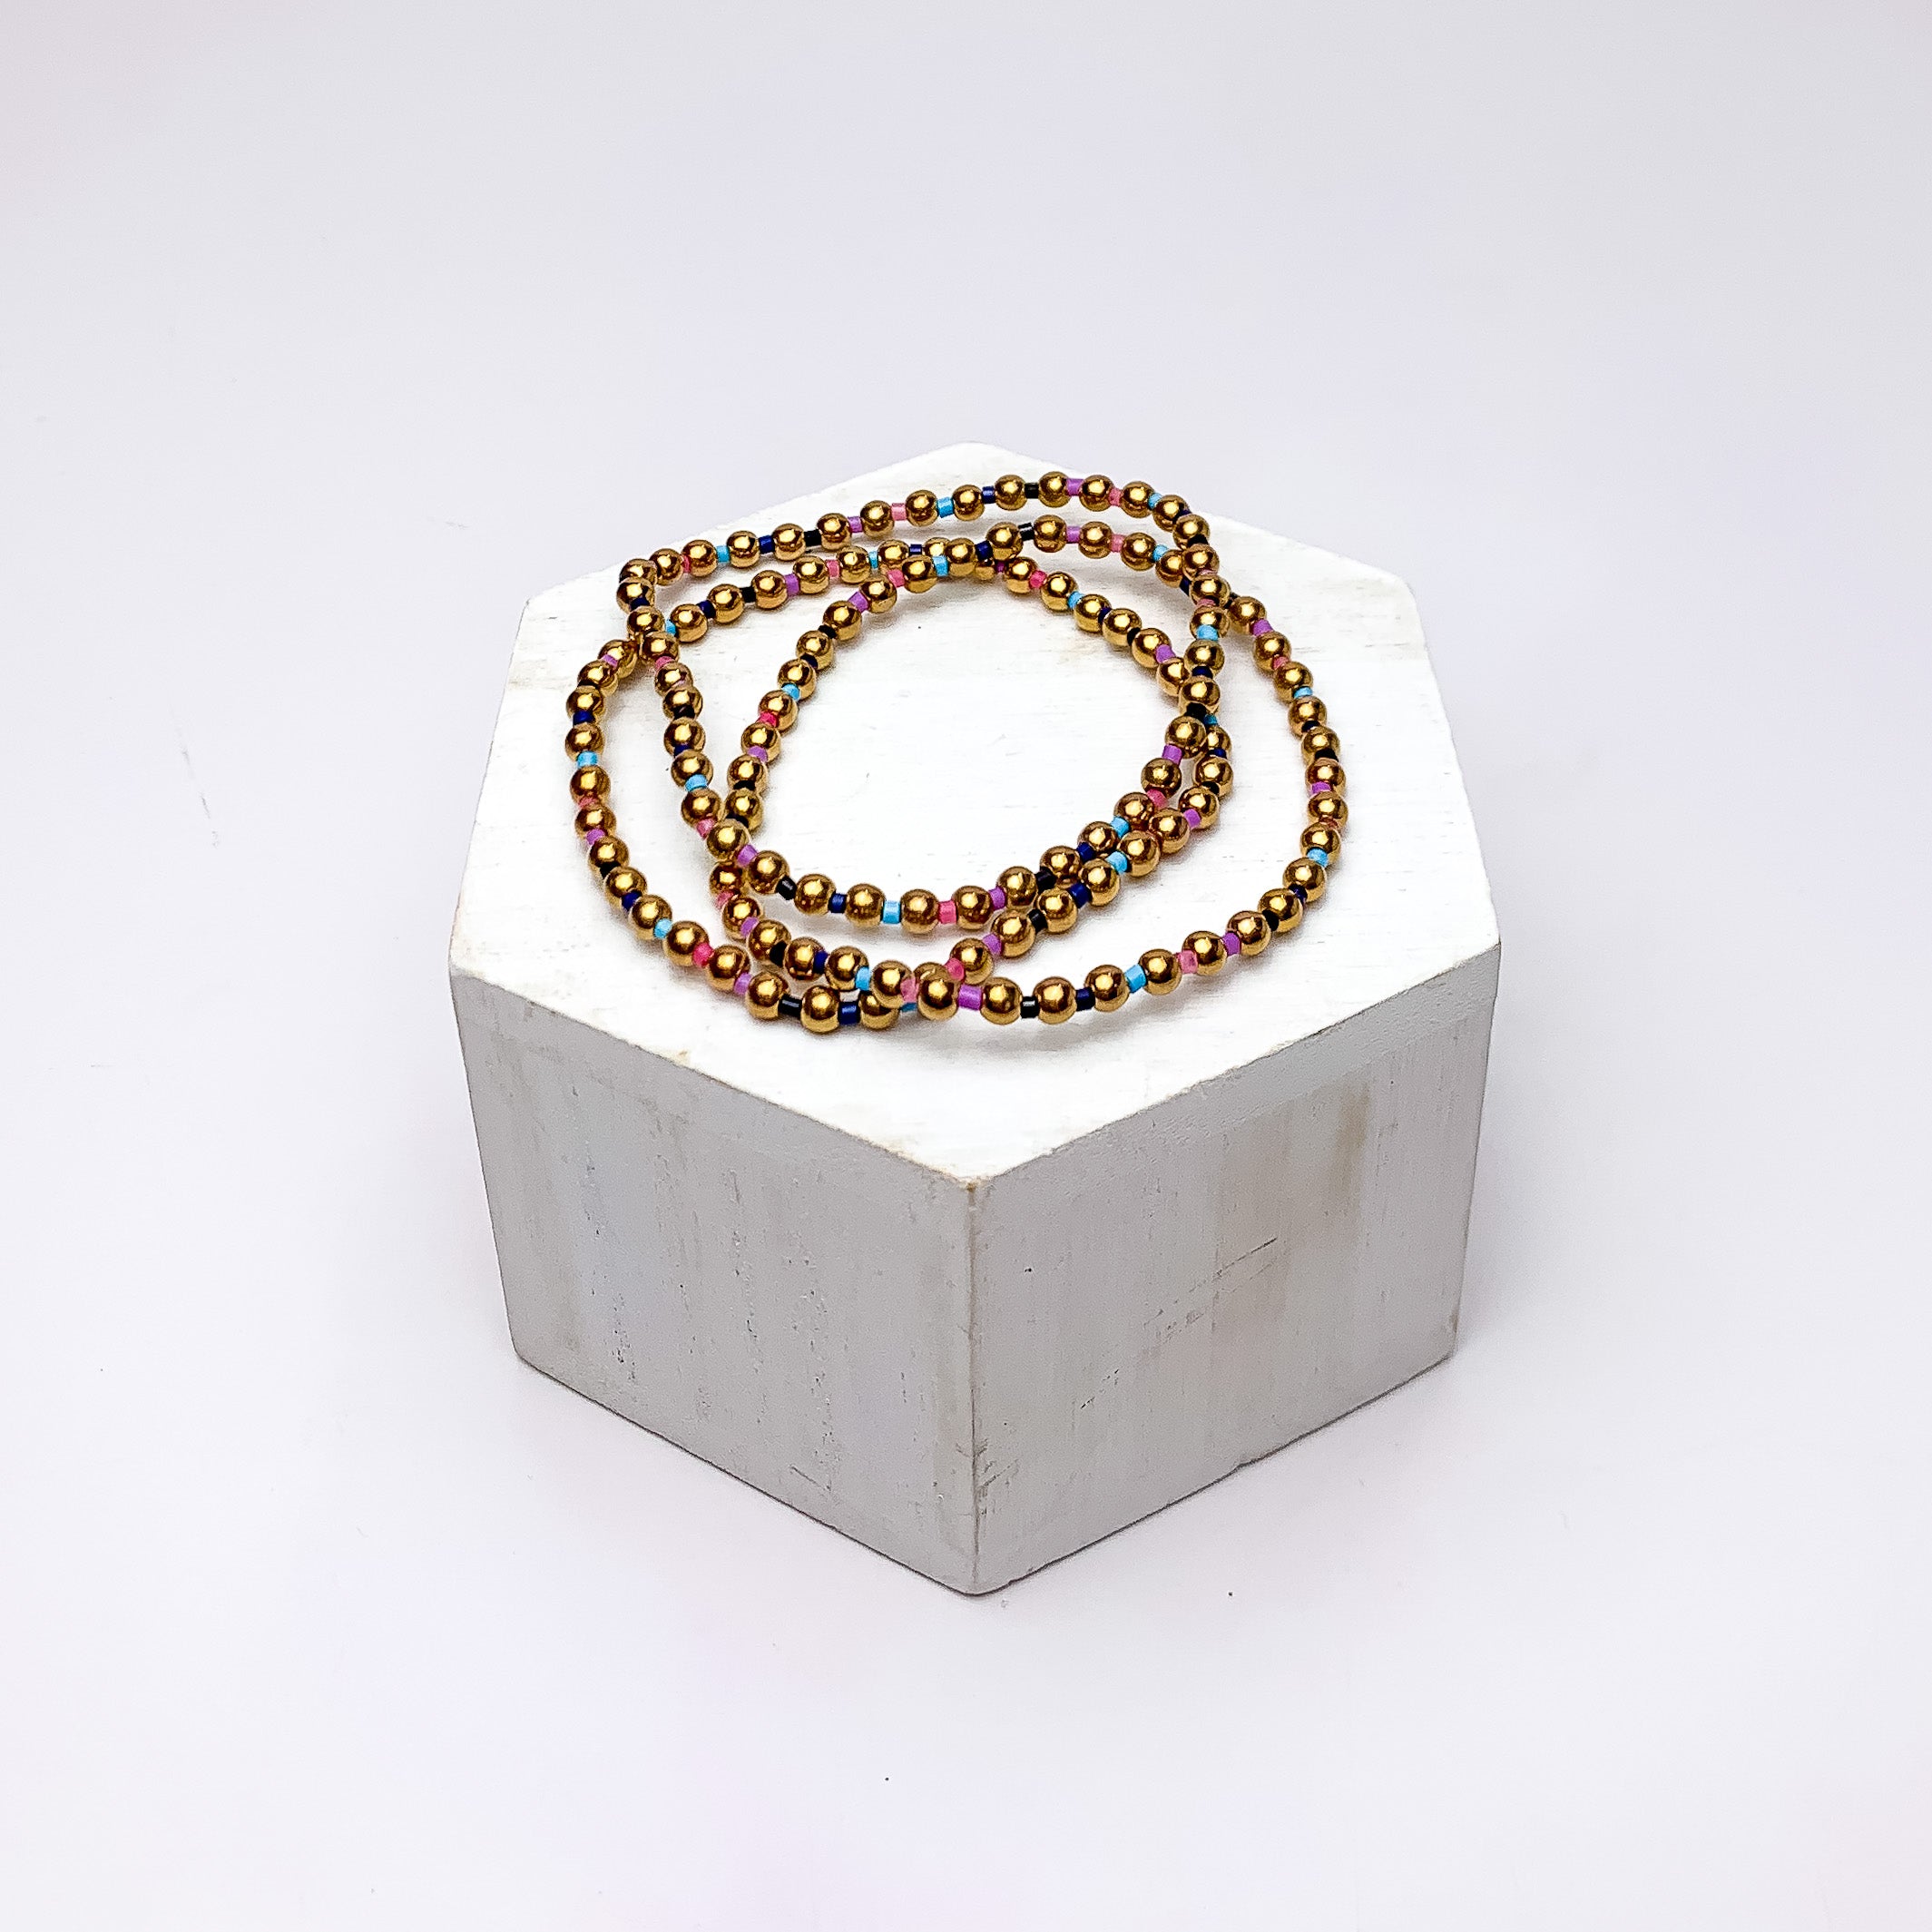 Set of Three | Stretchy Gold Tone Beaded Bracelets With Spacers in Multicolor. Pictured on a white background with the bracelets on a podium.